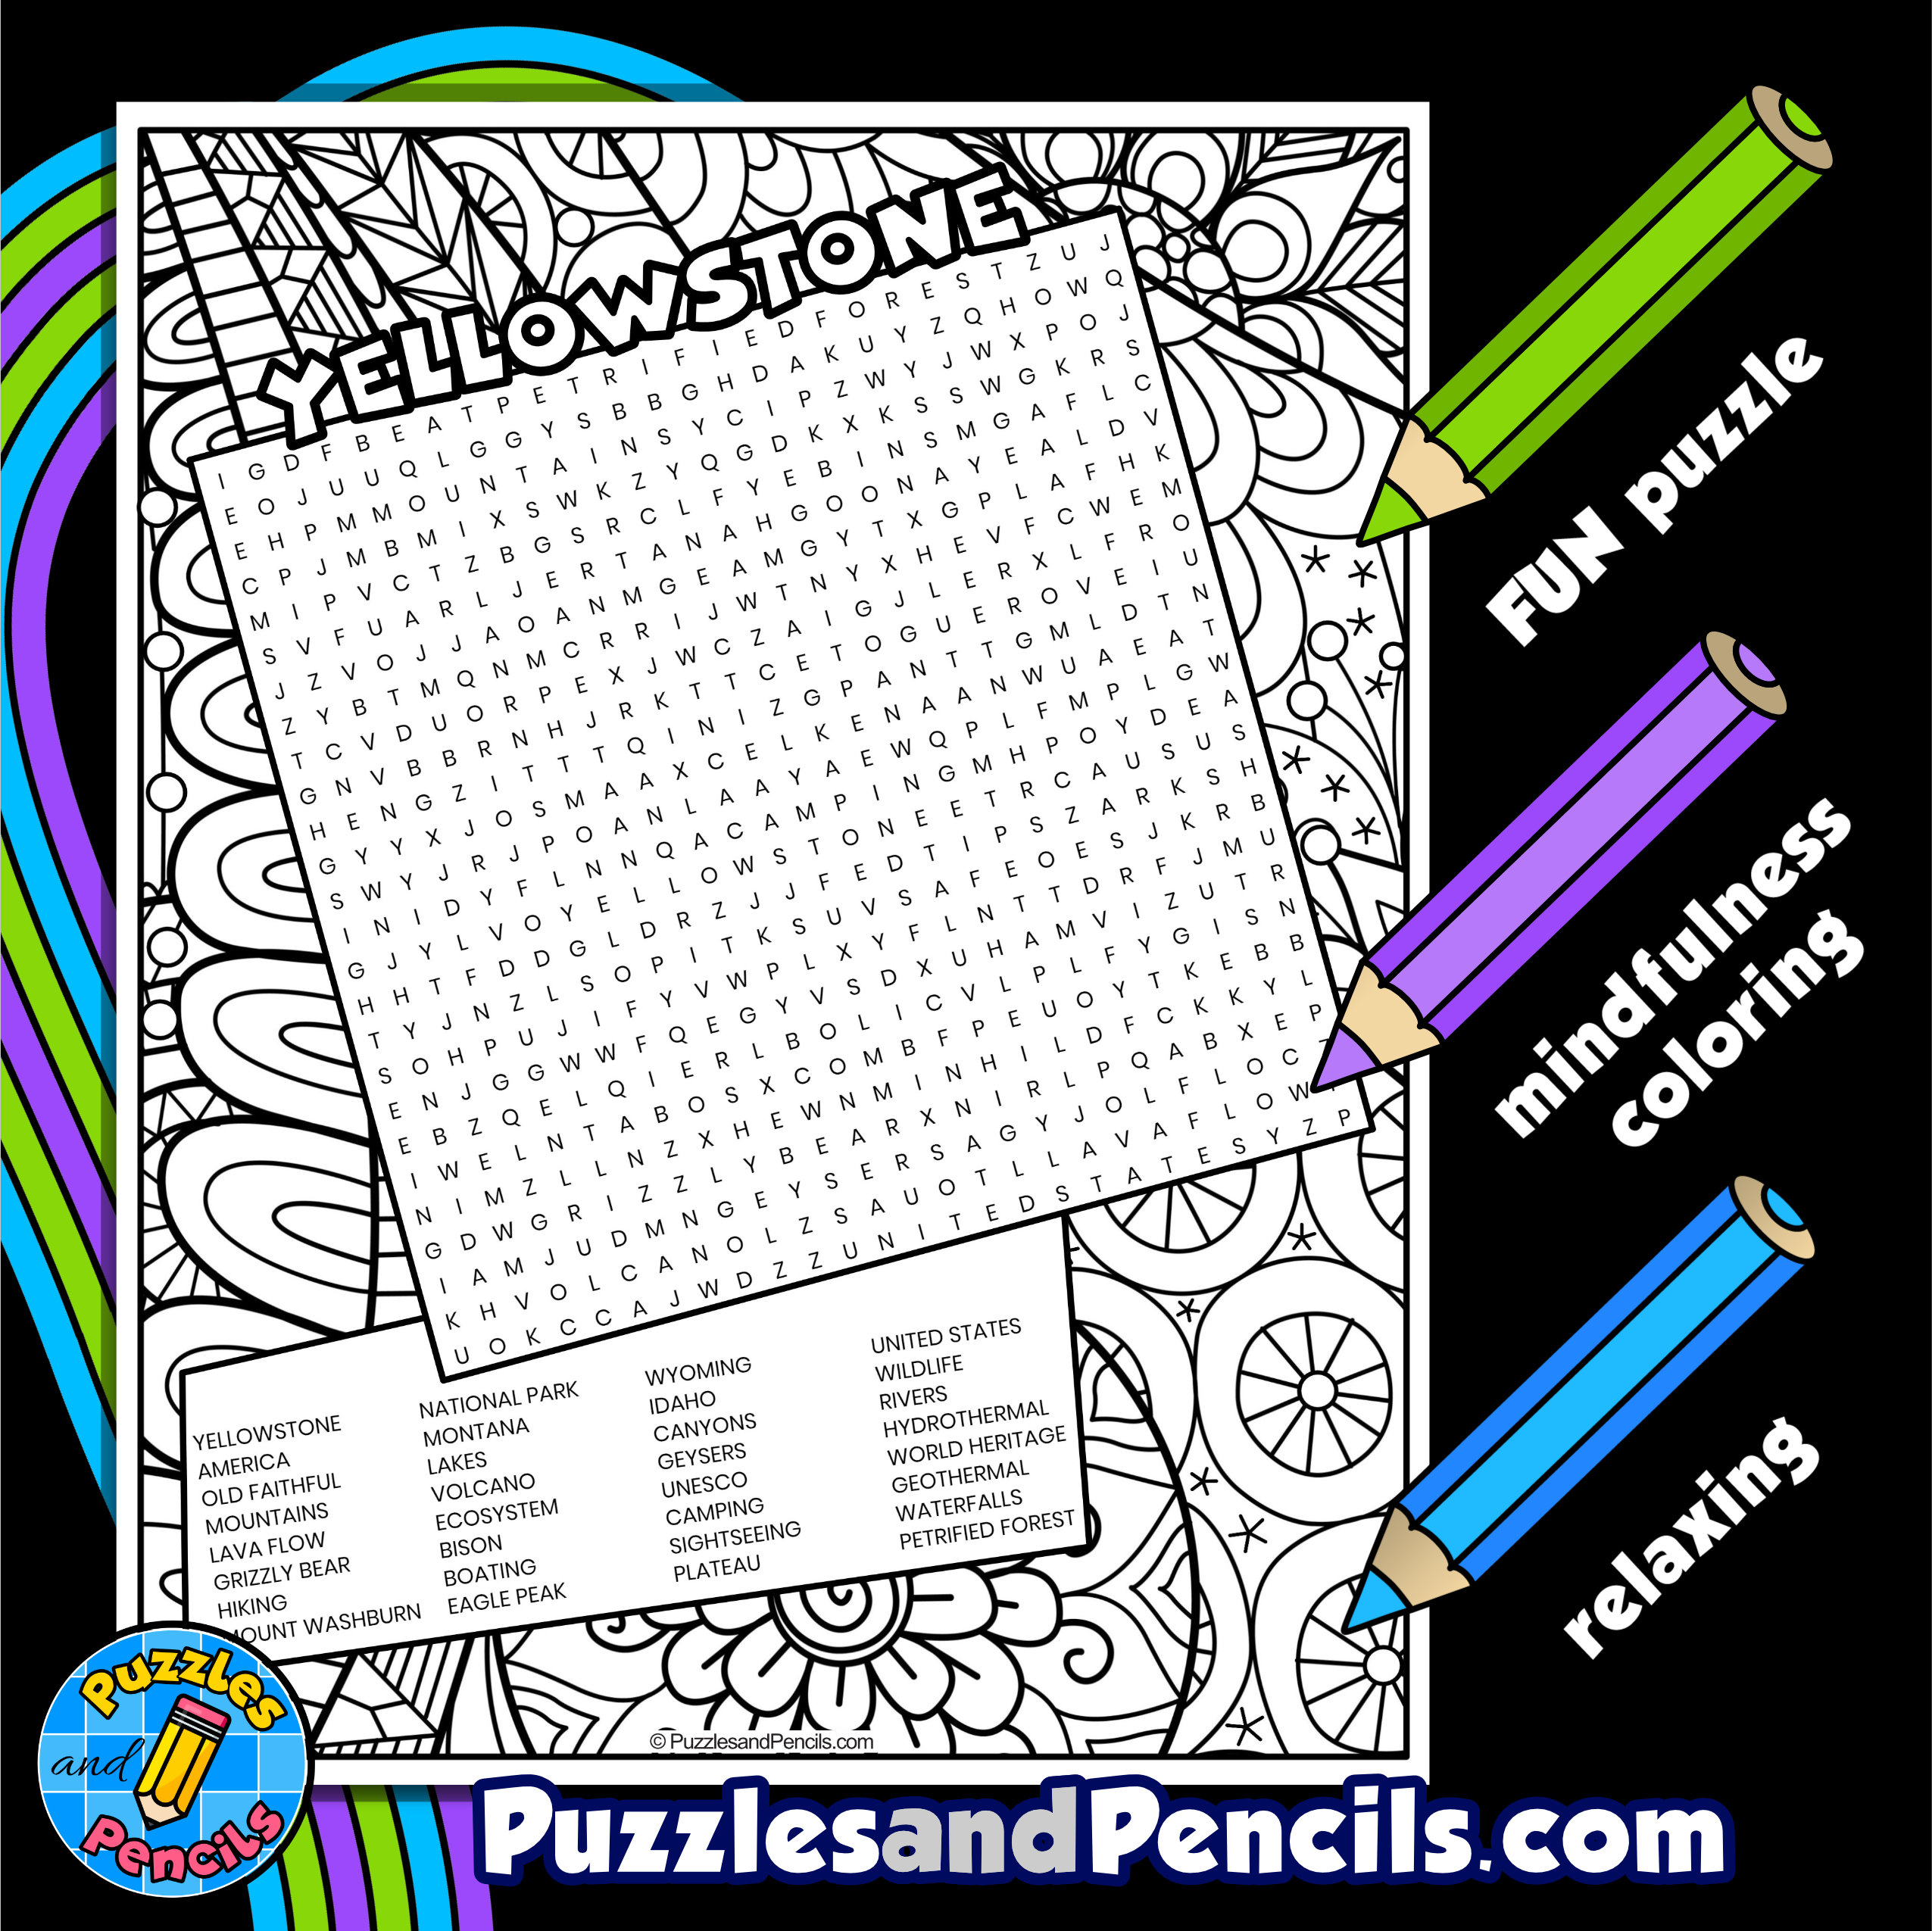 Yellowstone national park word search puzzle with coloring wordsearch made by teachers